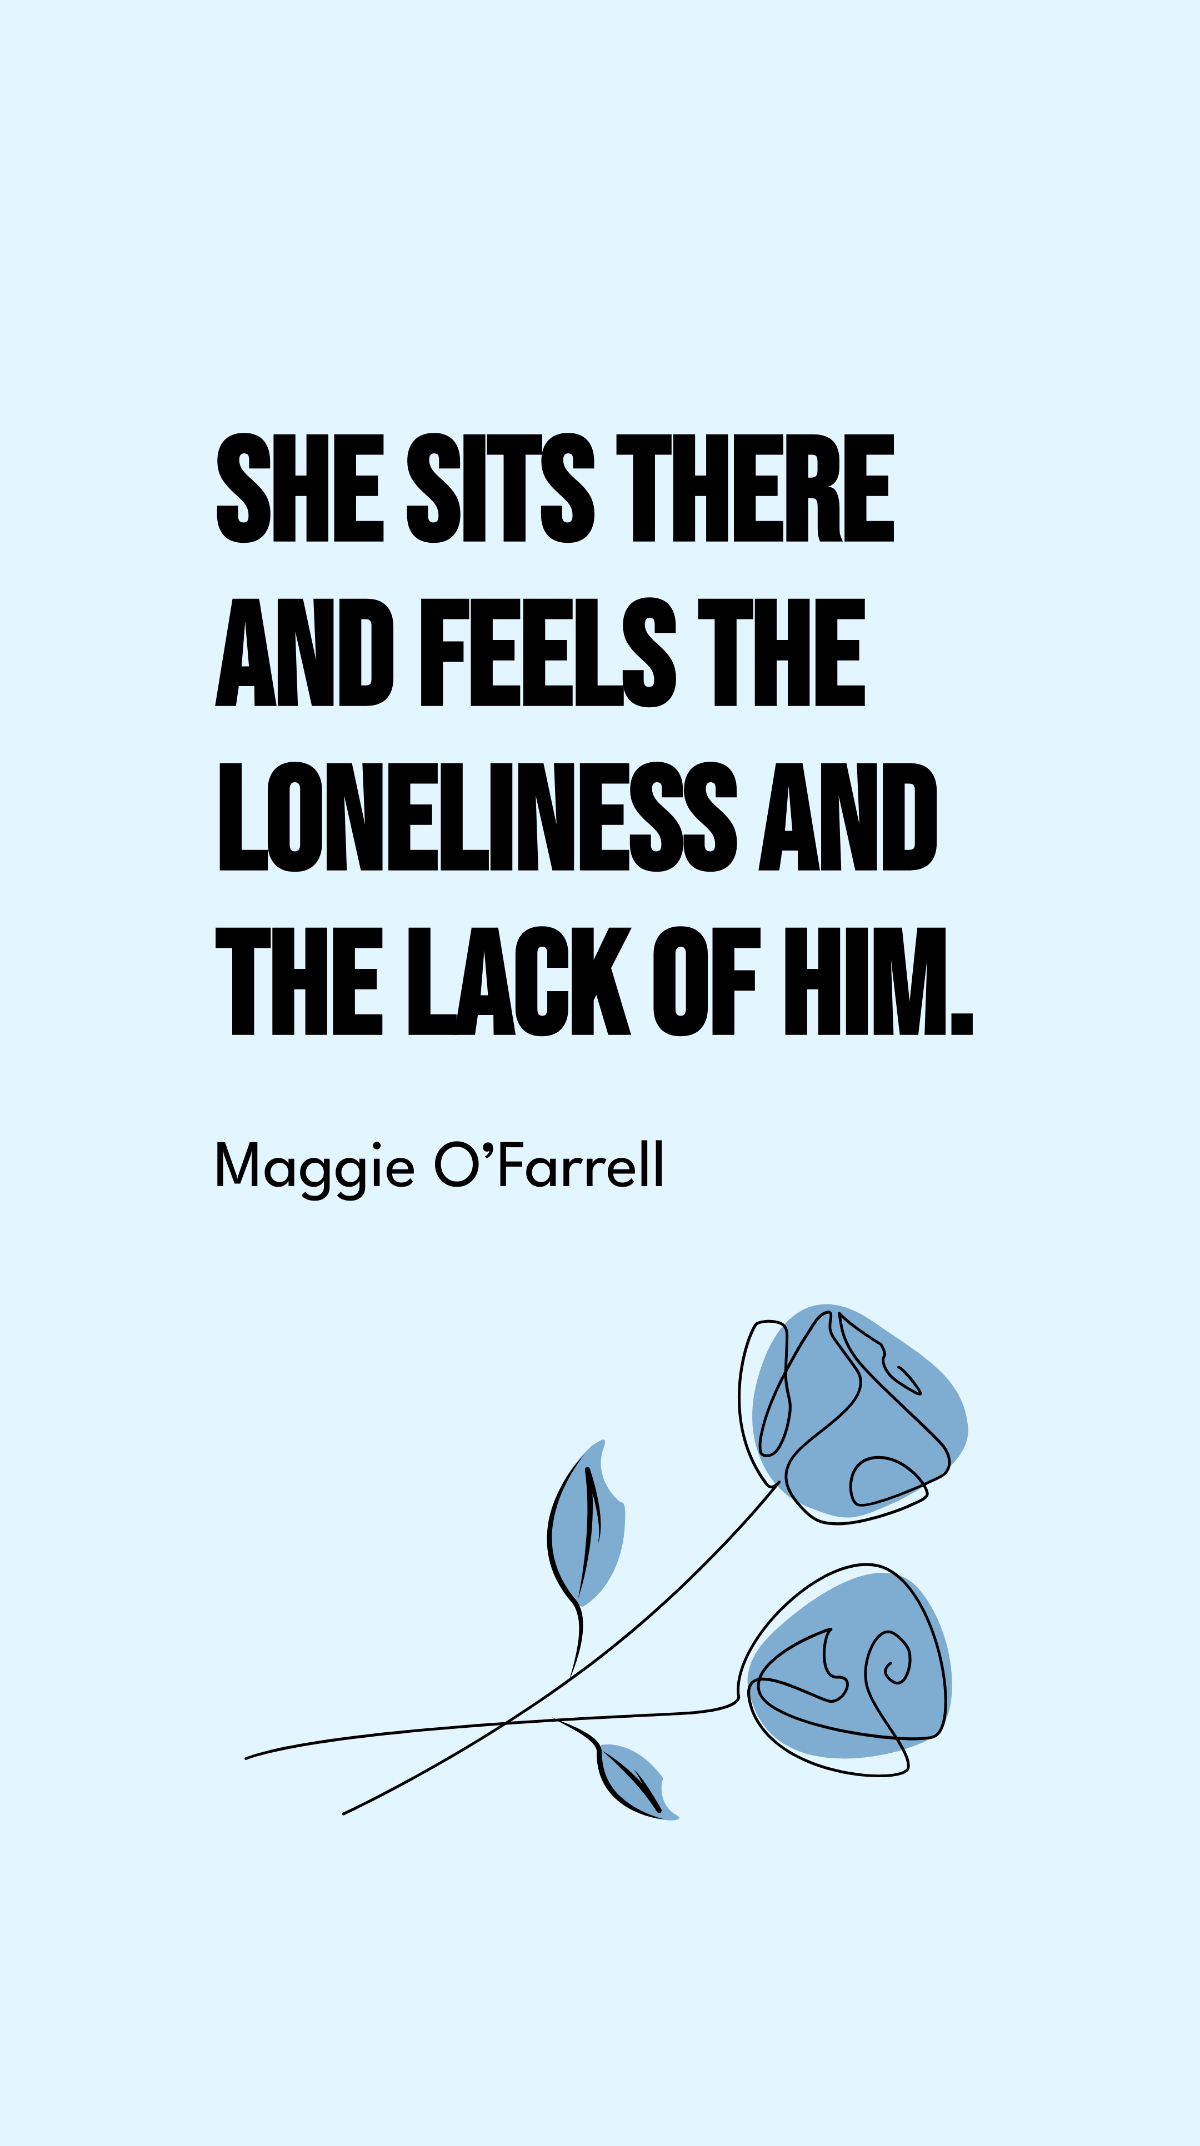 Free Maggie O’Farrell - She sits there and feels the loneliness and the lack of him. Template